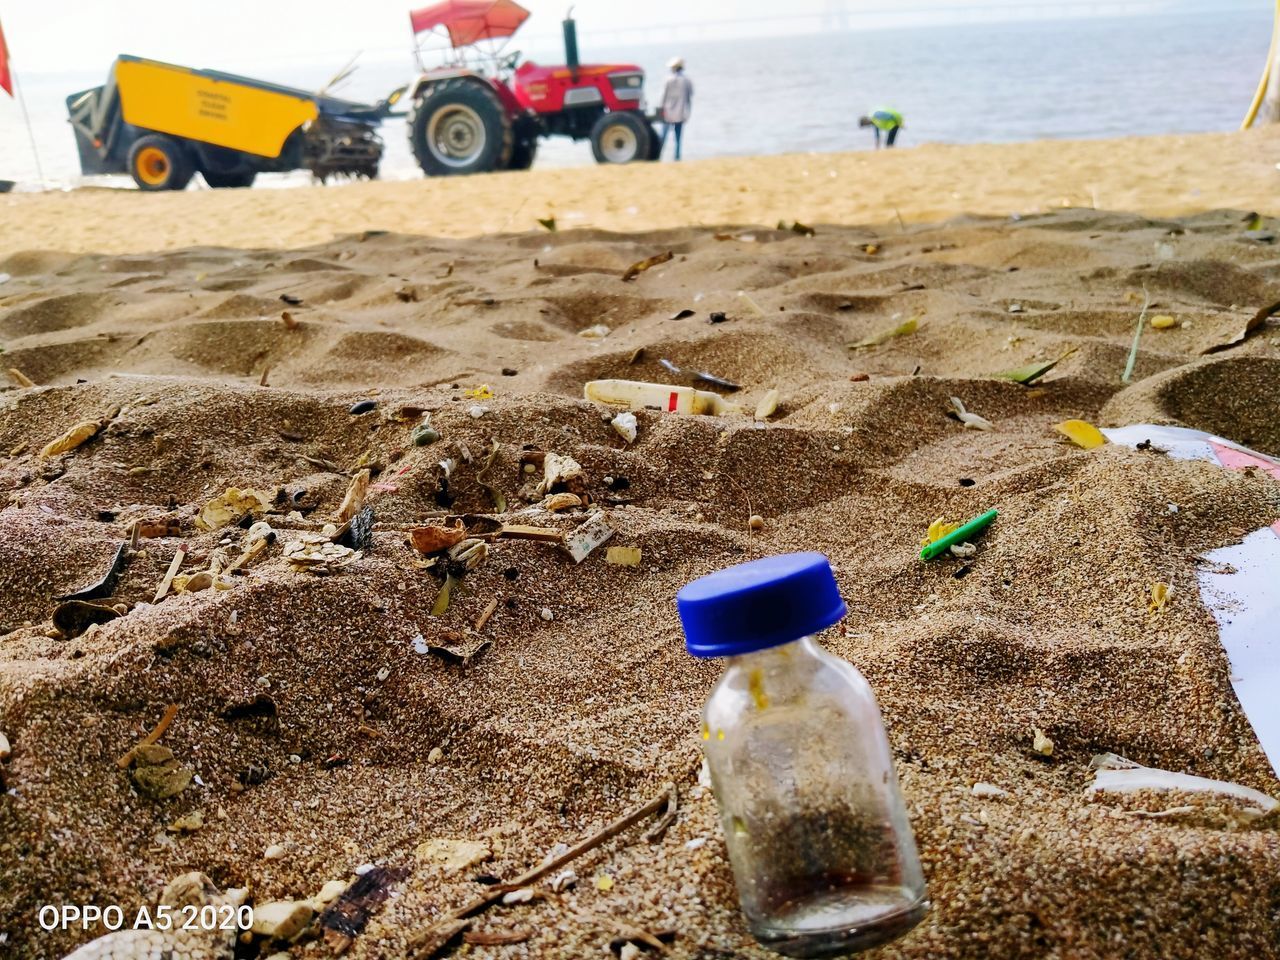 CLOSE-UP OF PLASTIC BOTTLE ON BEACH